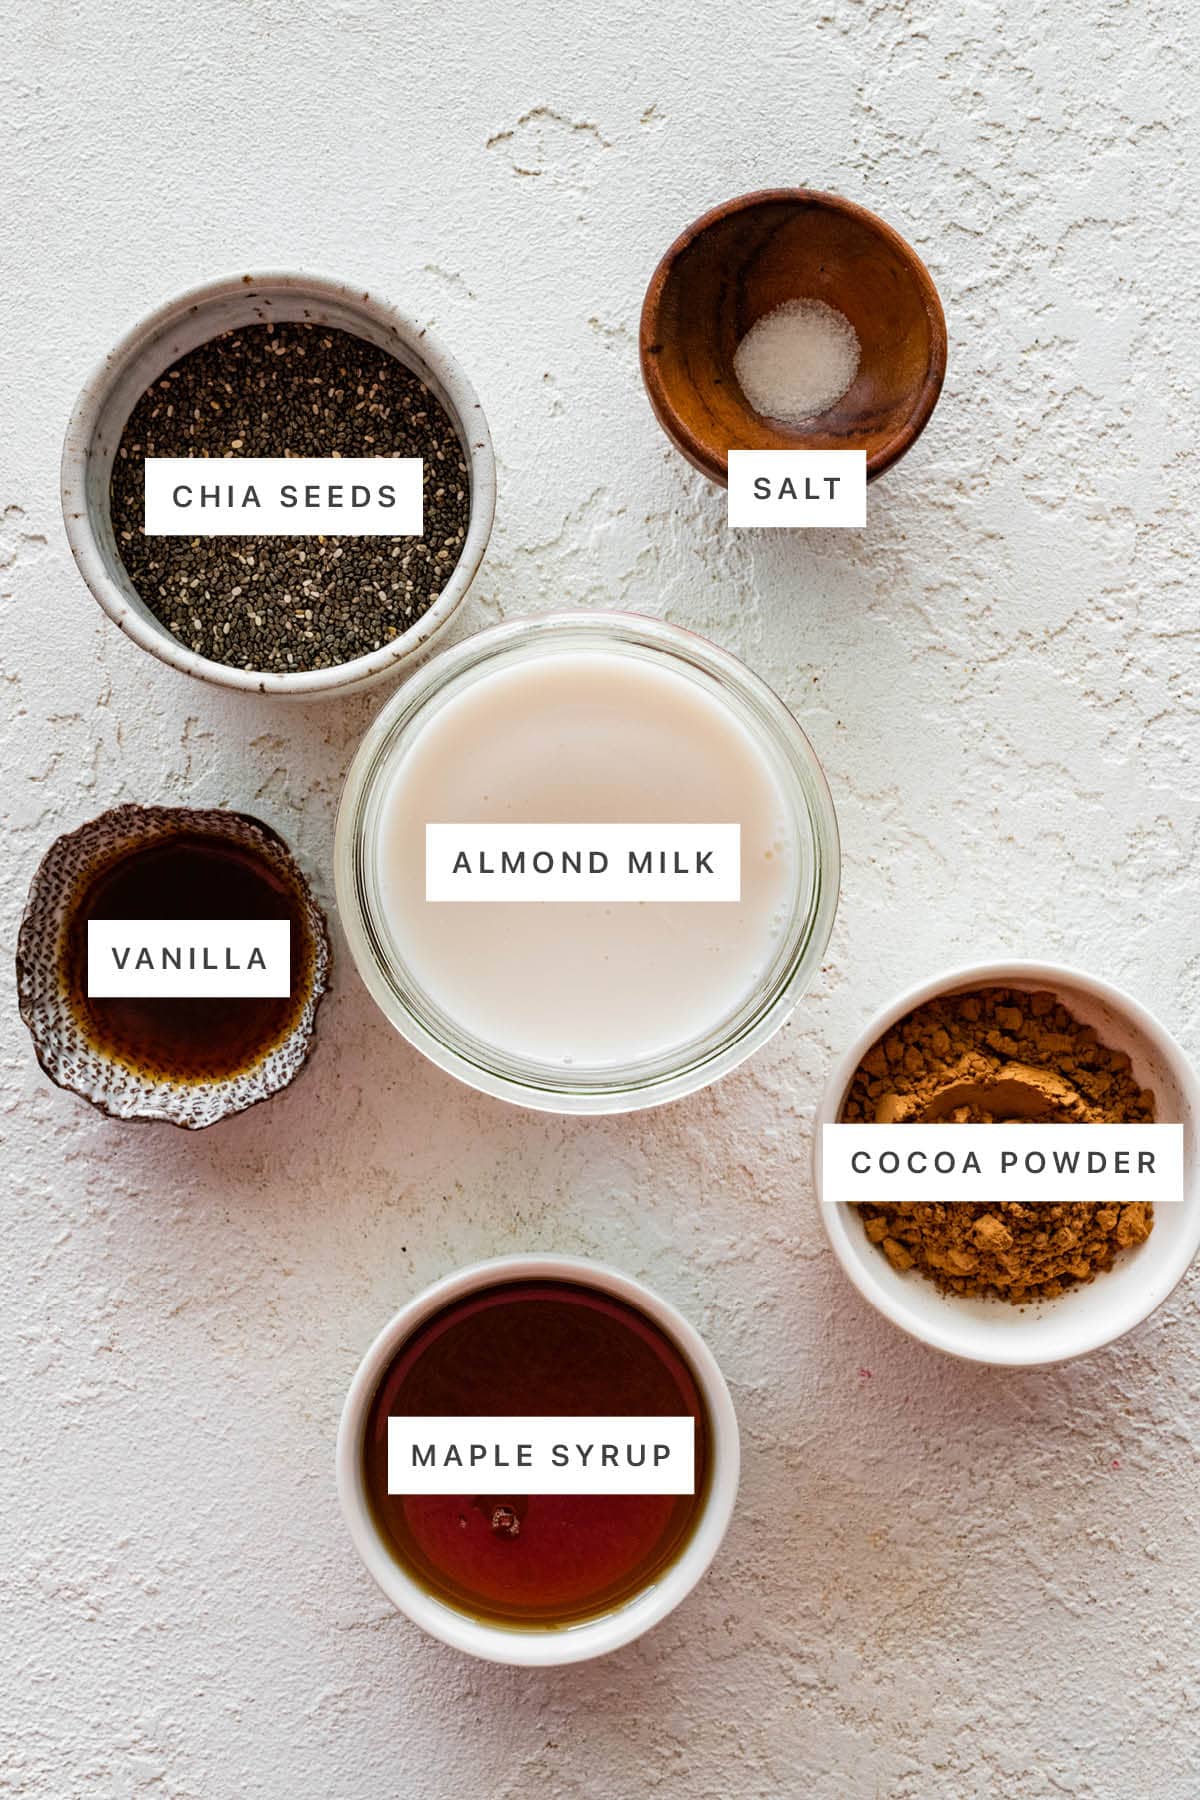 Ingredients measured out to make Chocolate Chia Pudding: chia seeds, salt, almond milk, vanilla, cocoa powder and maple syrup.